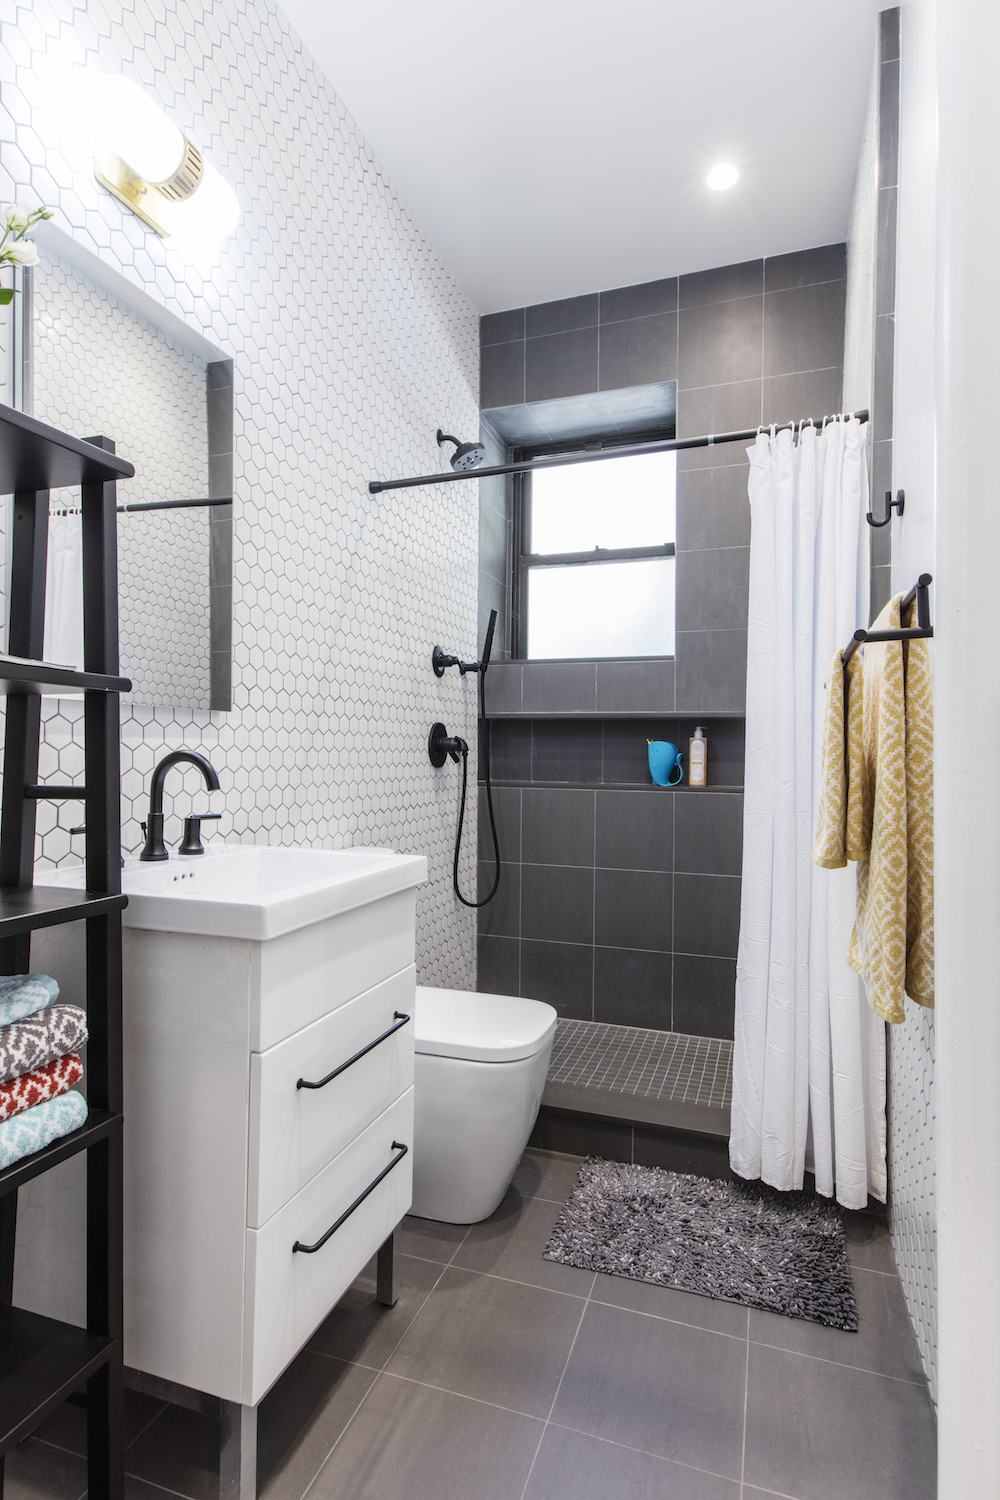 Bathroom with white tile walls, walk-in shower with gray tile and white bathroom vanity